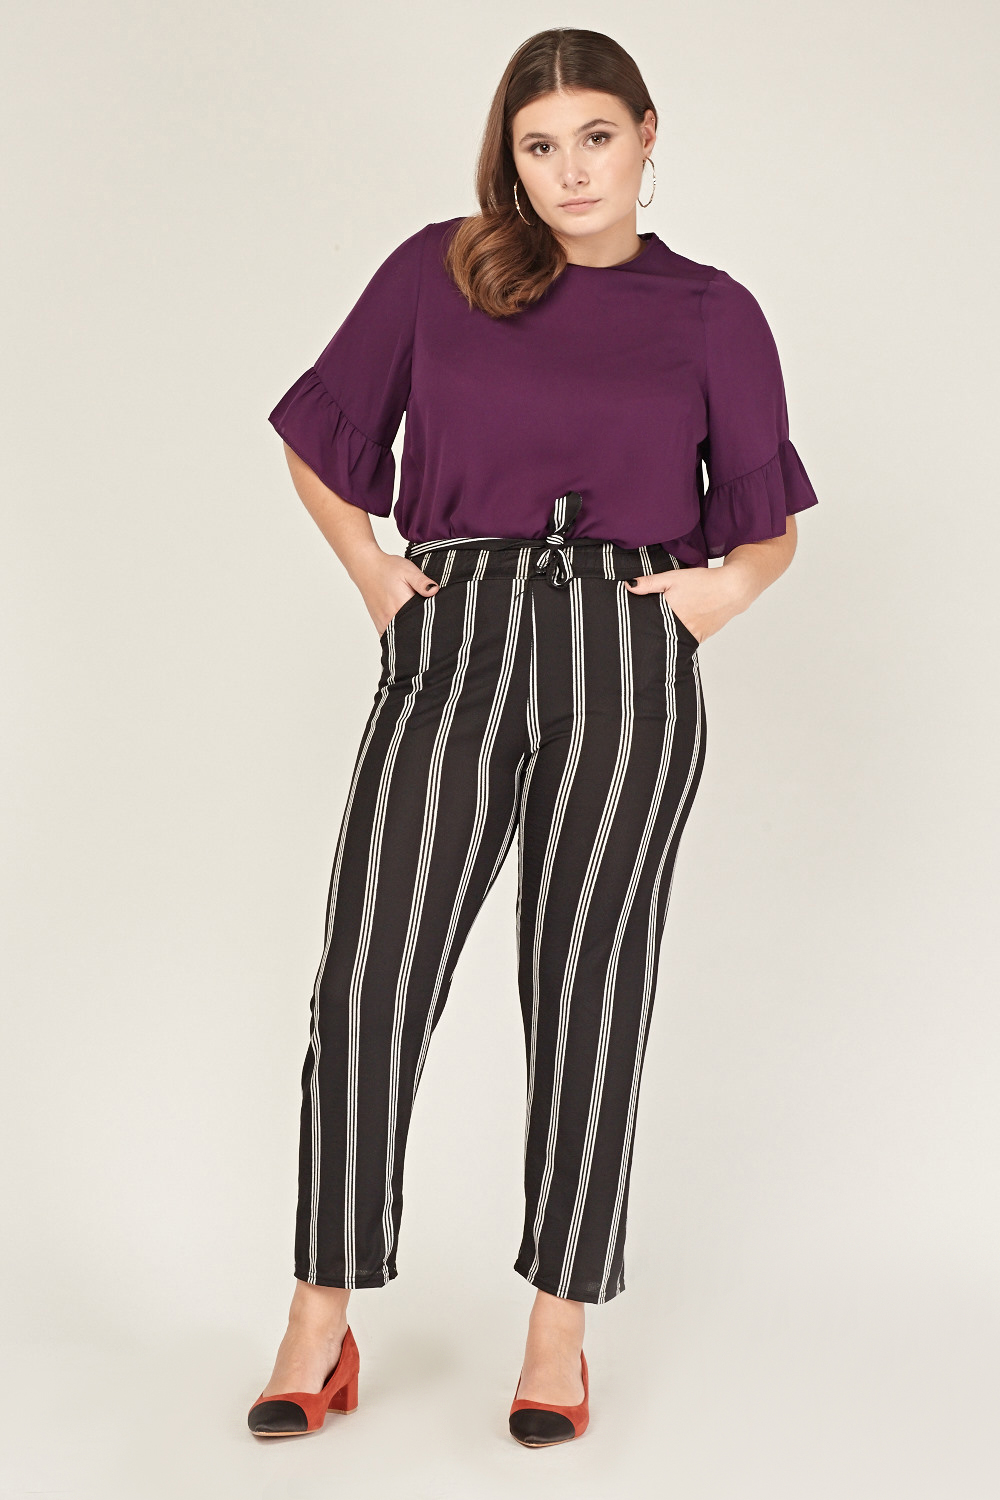 Stripe Tie Up Elasticated Trousers - Just $3